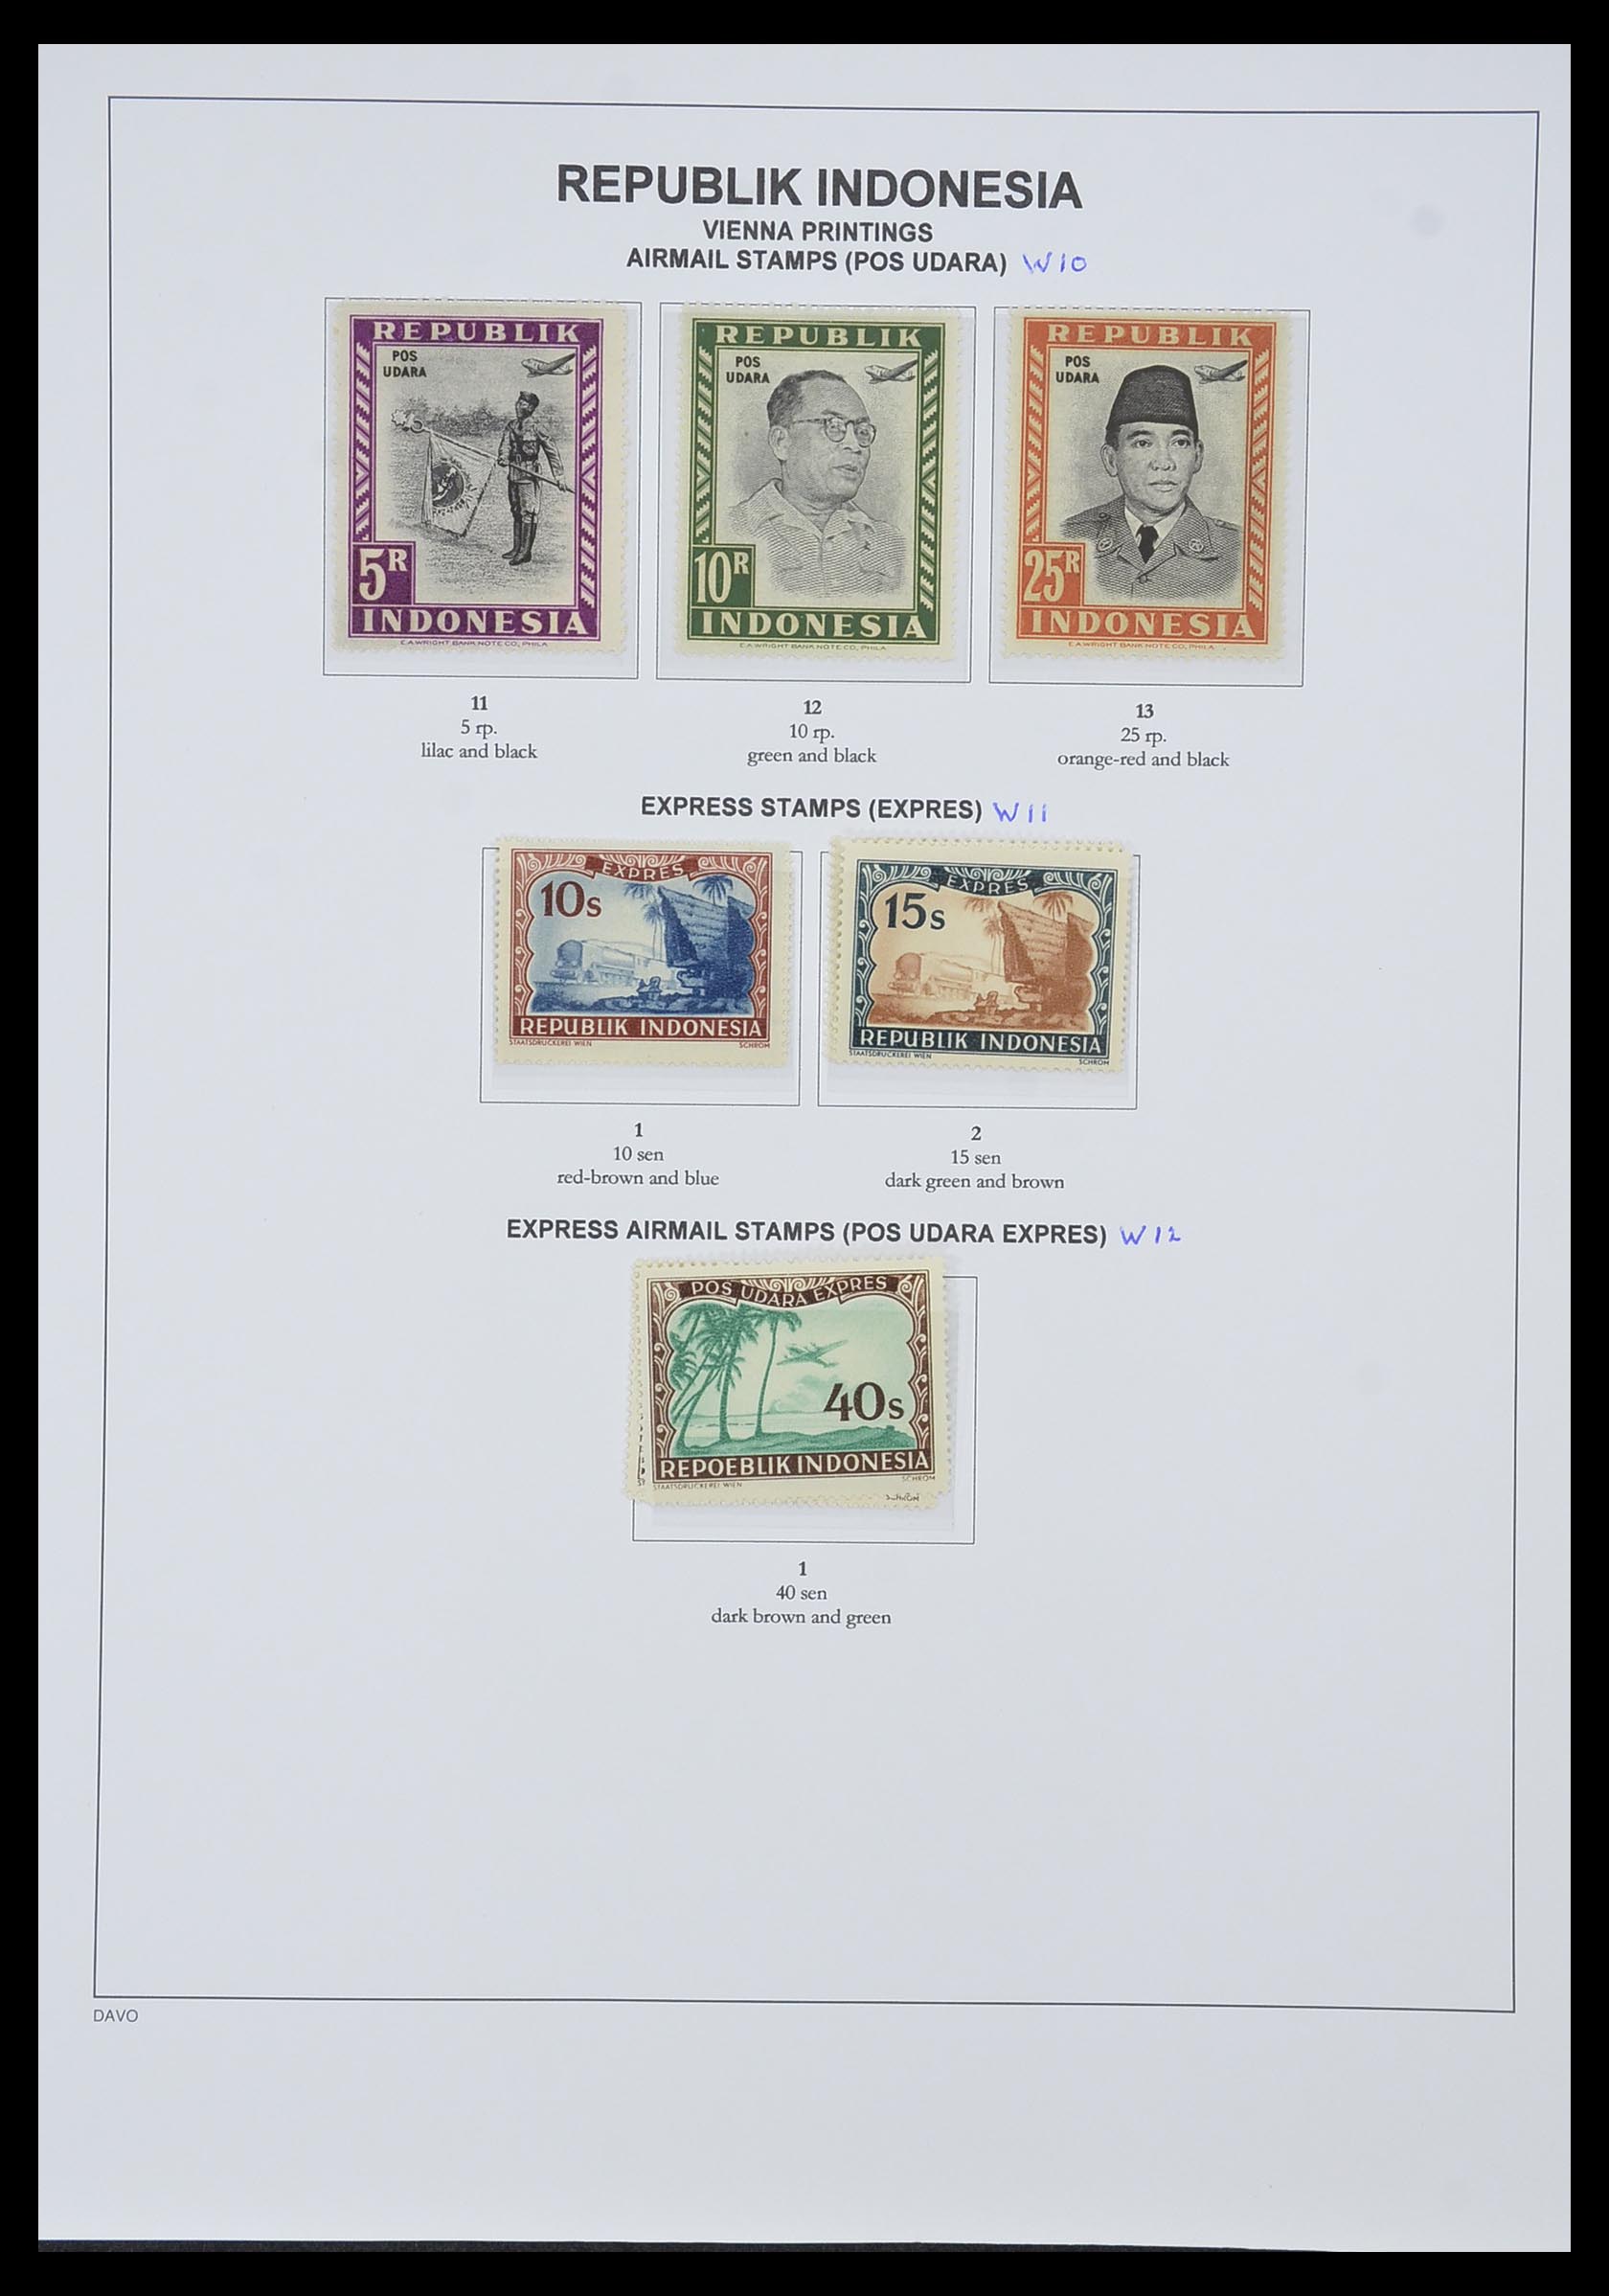 33988 022 - Stamp collection 33988 Vienna printings Indonesia.